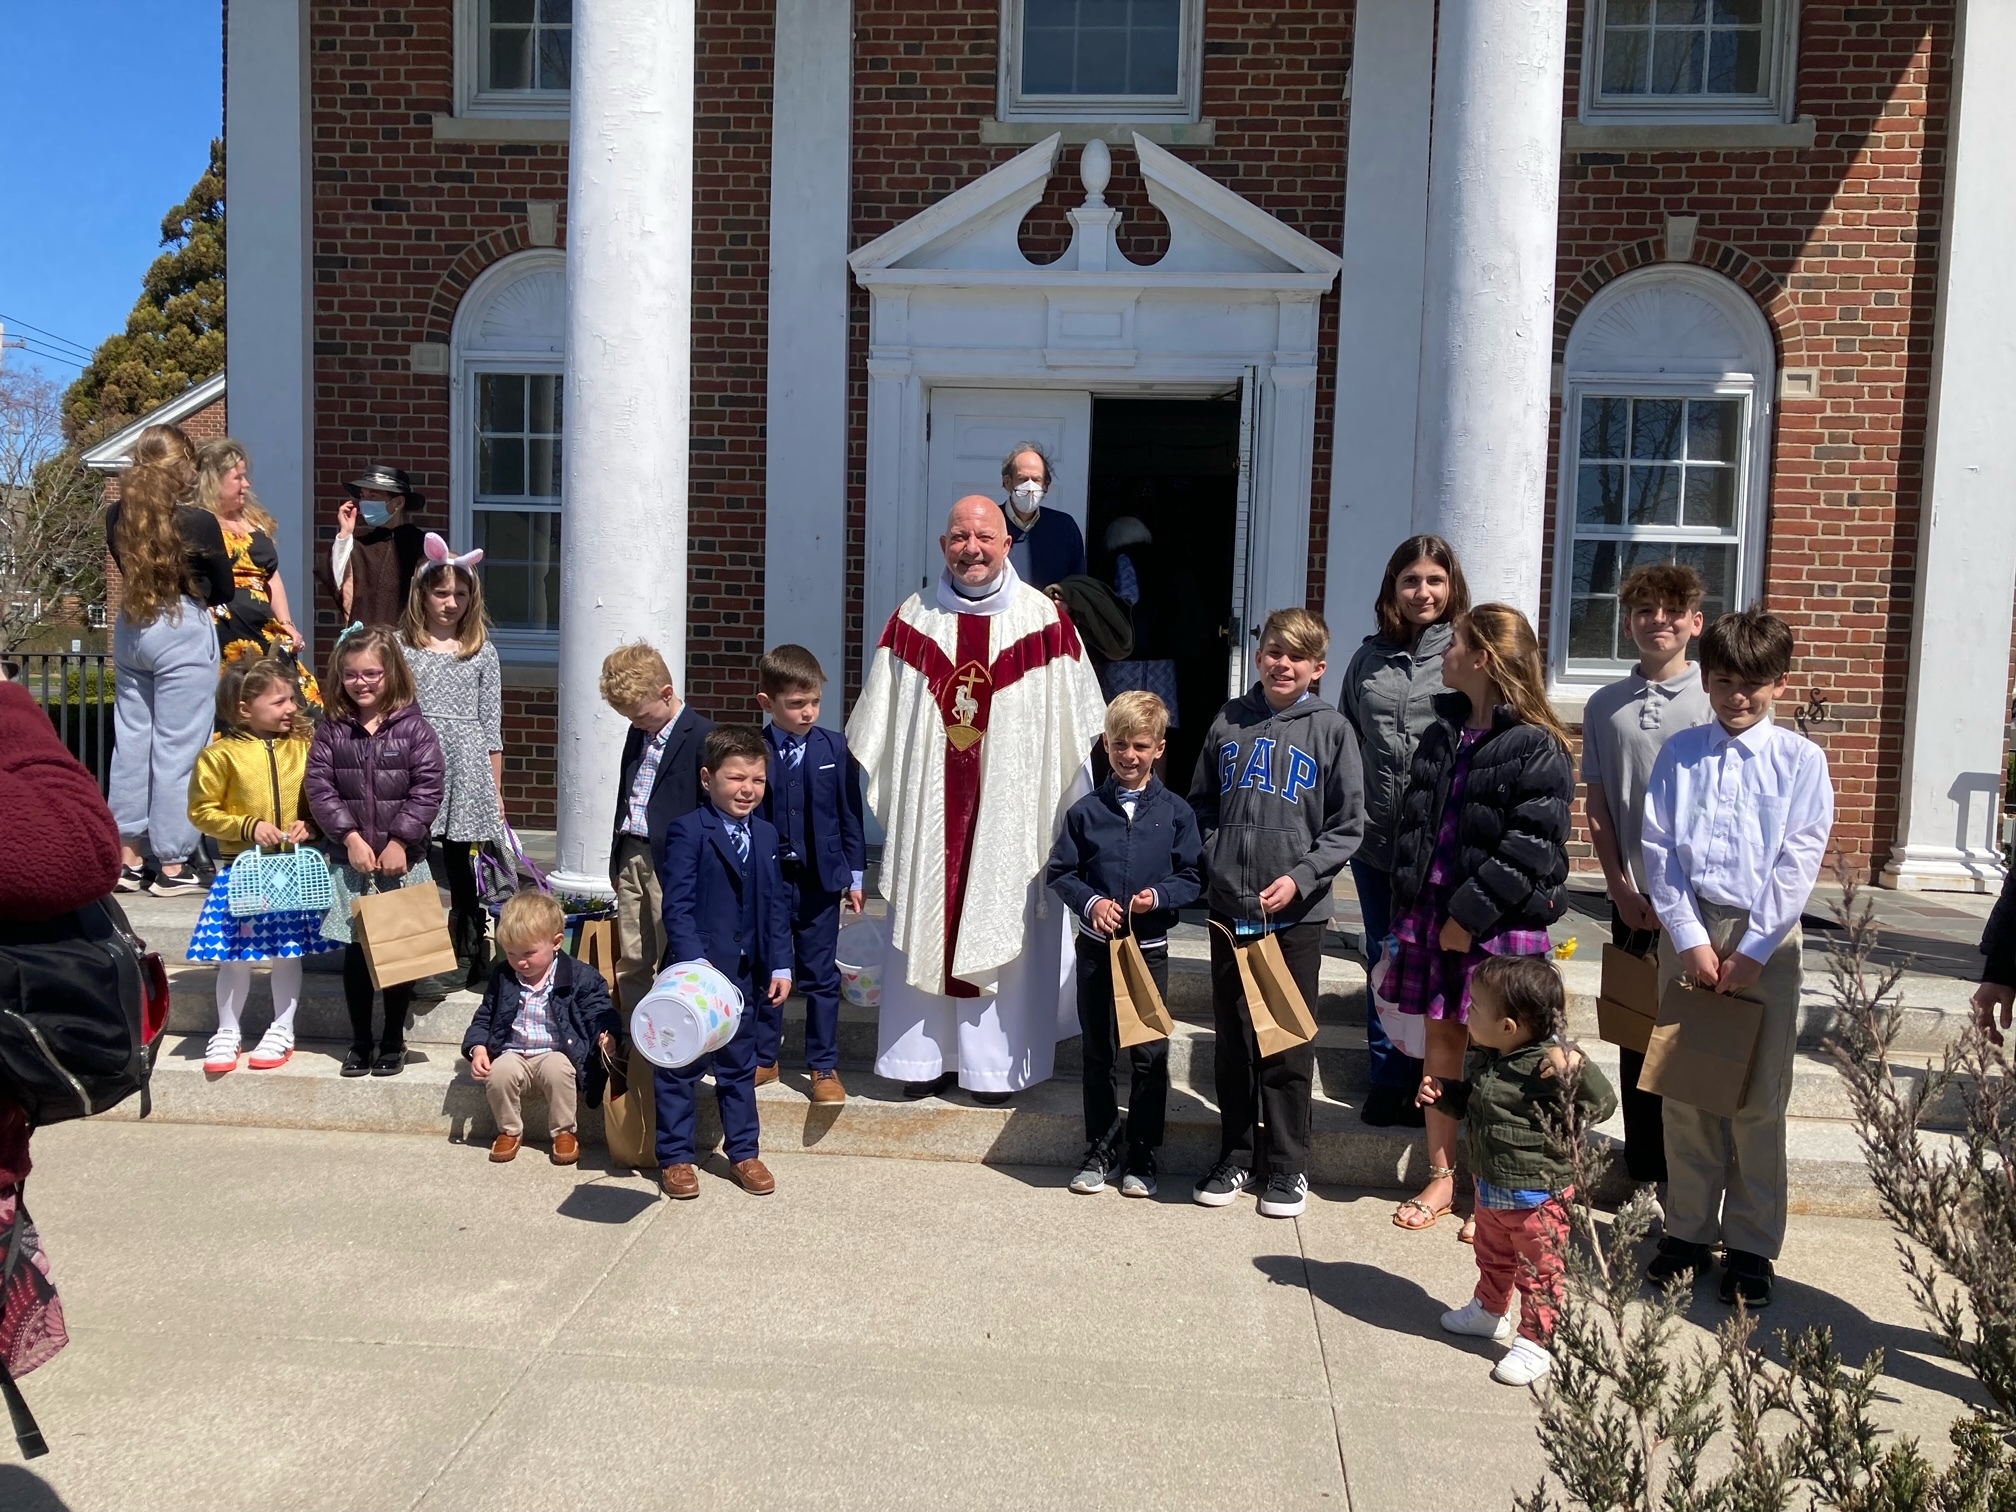 Following the Easter service on Sunday, children gathered for some holiday fun at St. Mark's Episcopal Church in Westhampton Beach. COURTESY ST. MARK'S EPISCOPAL CHURCH